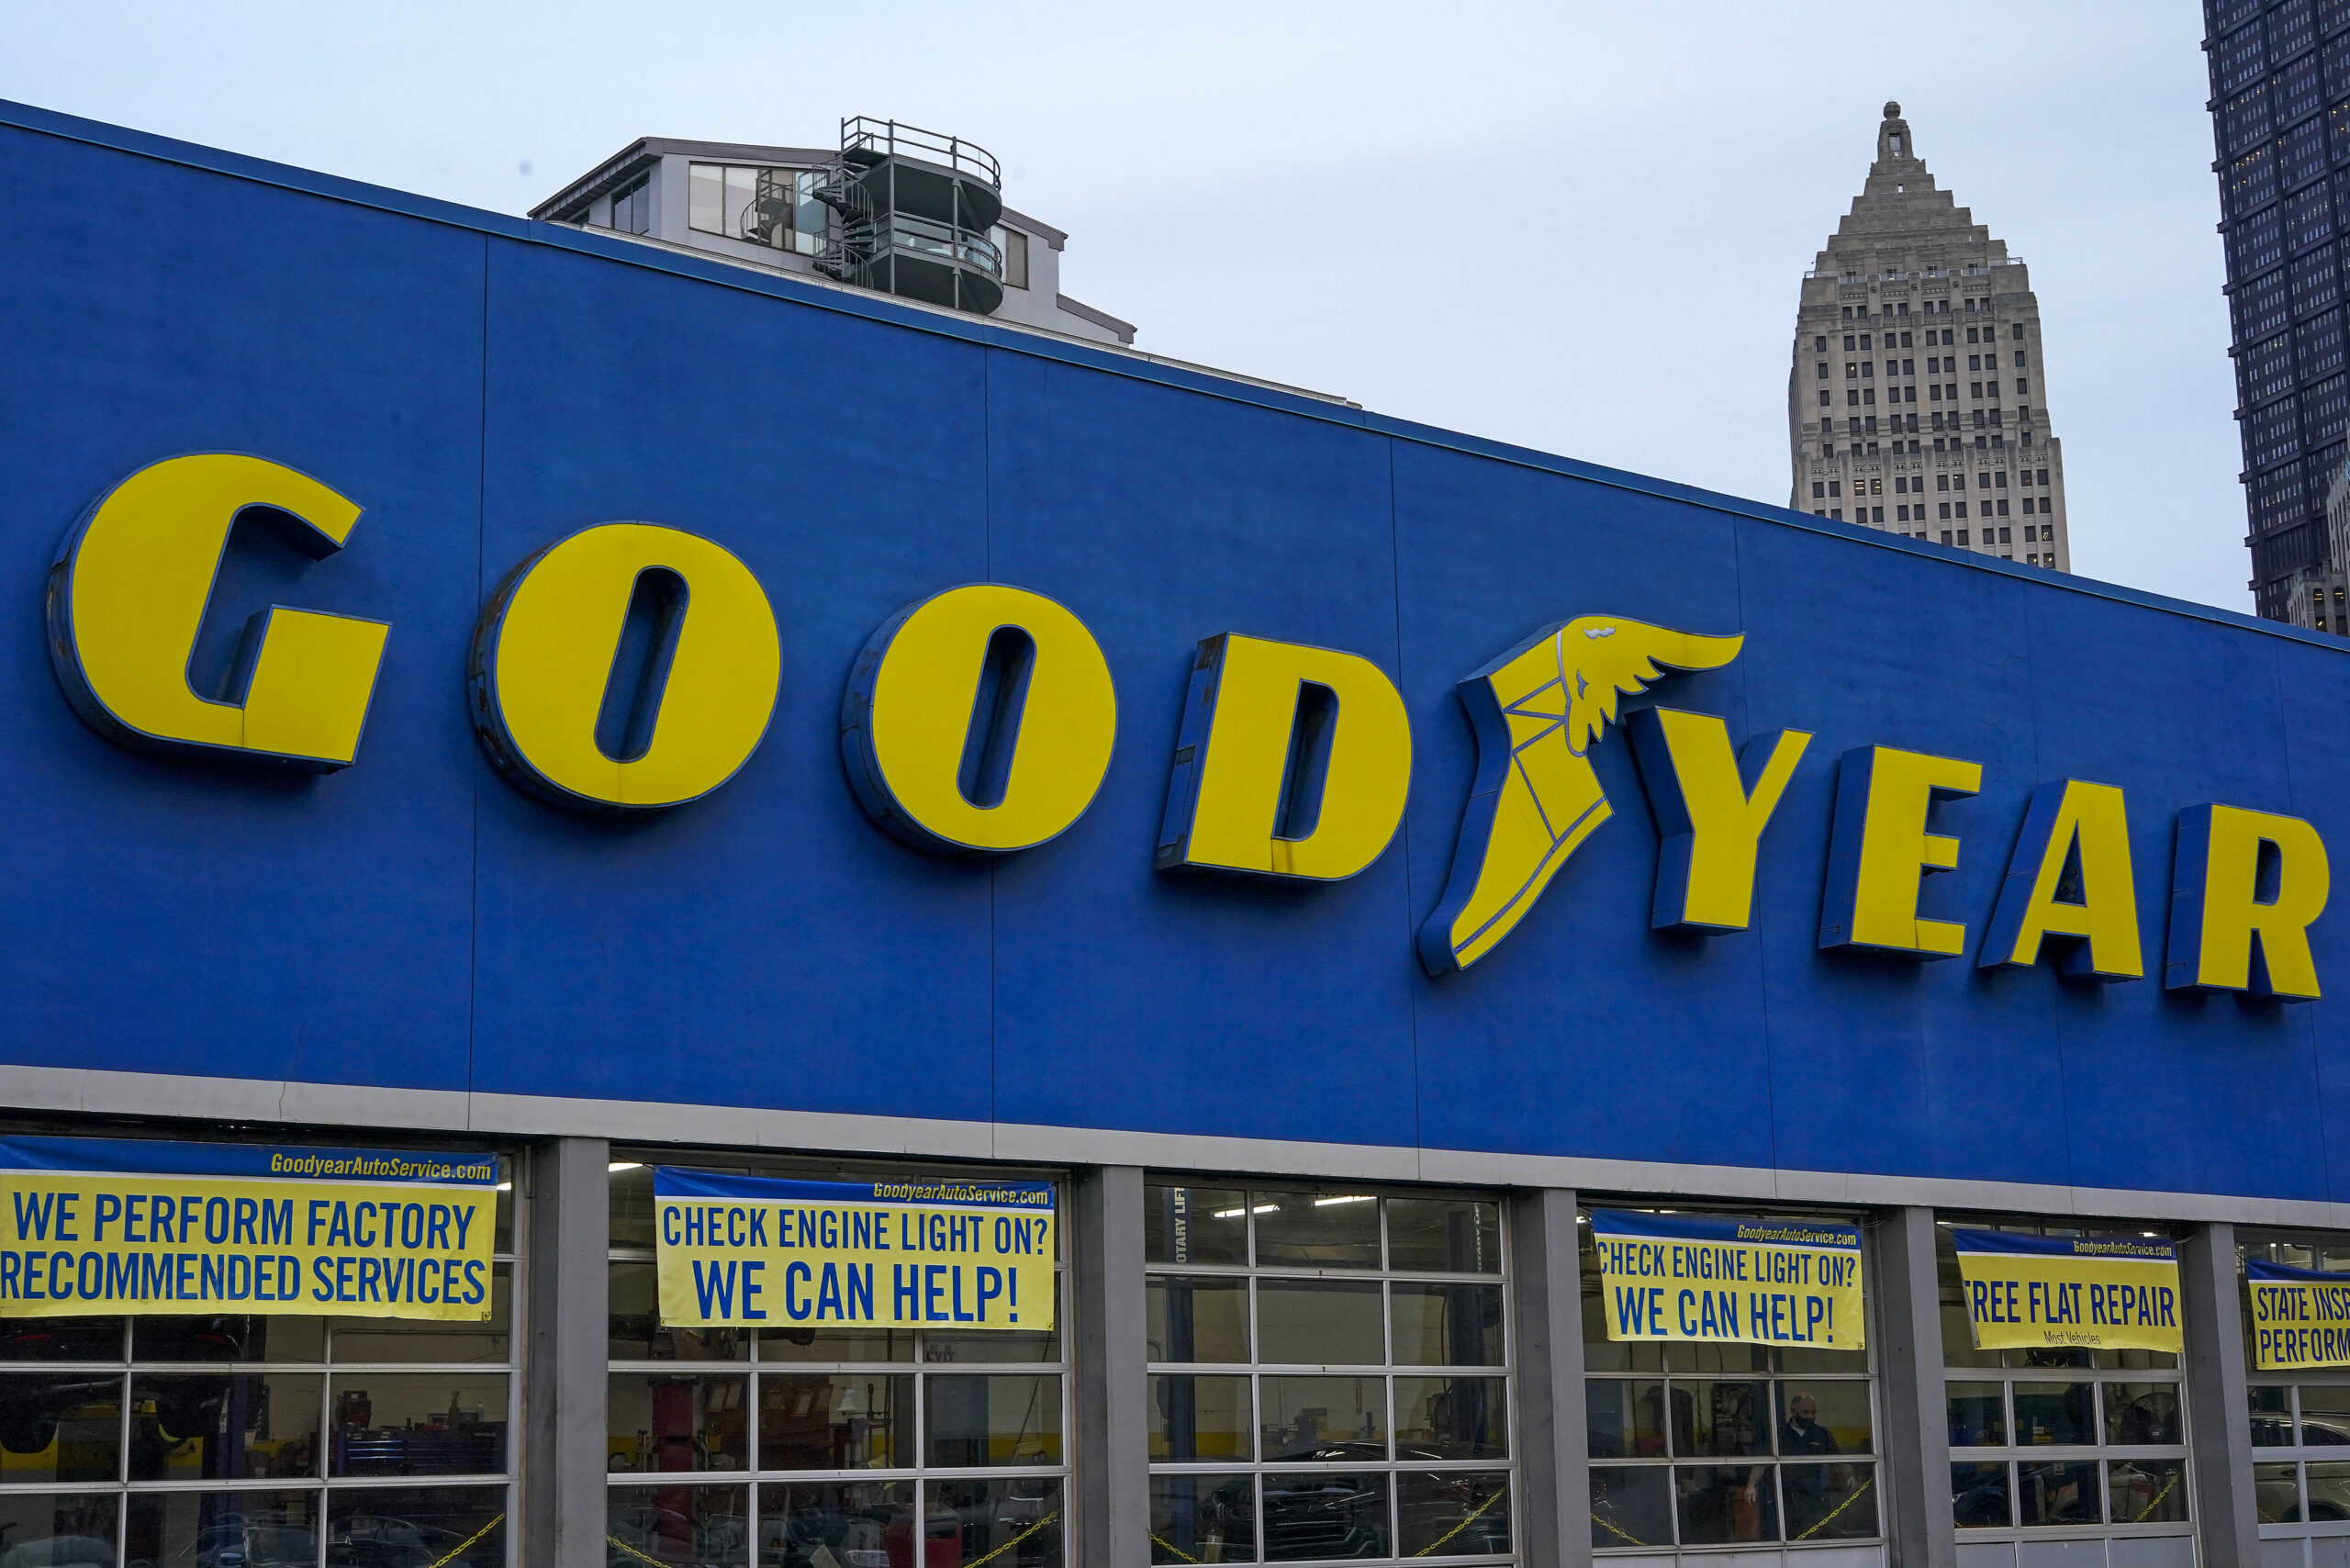 FILE - This is a Goodyear tire garage in downtown Pittsburgh on Wednesday, Jan. 12, 2022. Nine years after the last one was made, Goodyear has agreed to recall more than 173,000 recreational vehicle tires that the government says can fail and have killed or injured 95 people since 1998. (AP Photo/Gene J. Puskar, File)